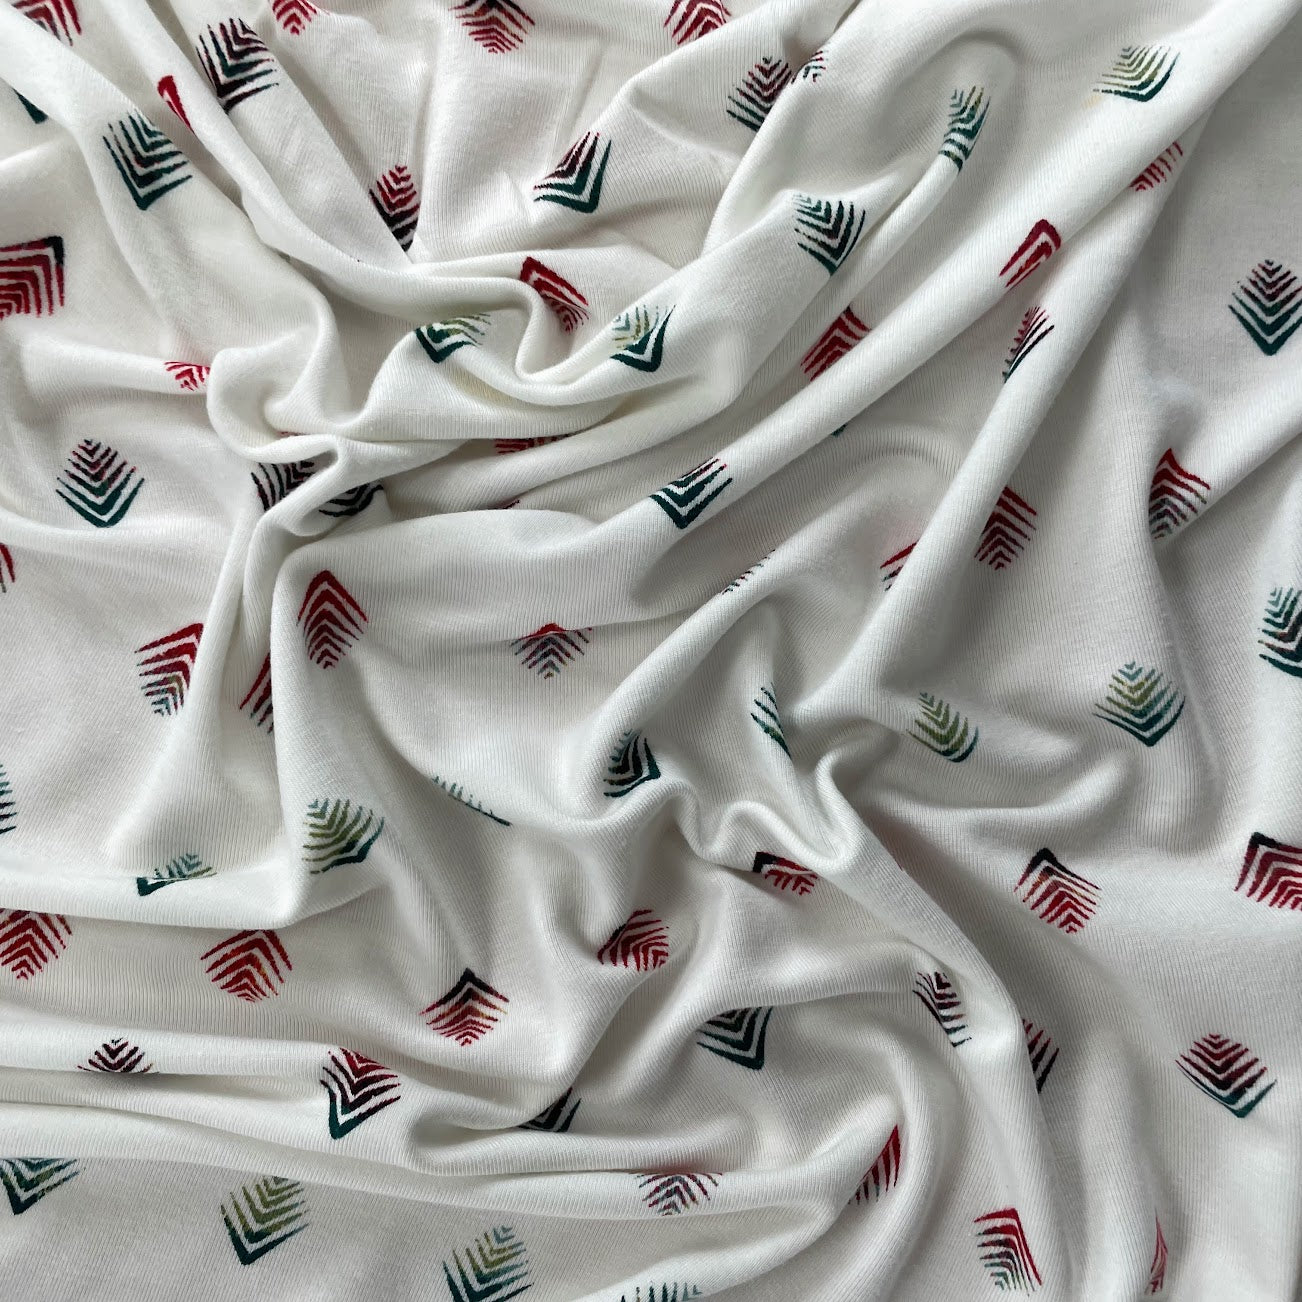 Bamboo Stretch Jersey Knit - Holiday Pine Print - Deadstock - 250gsm